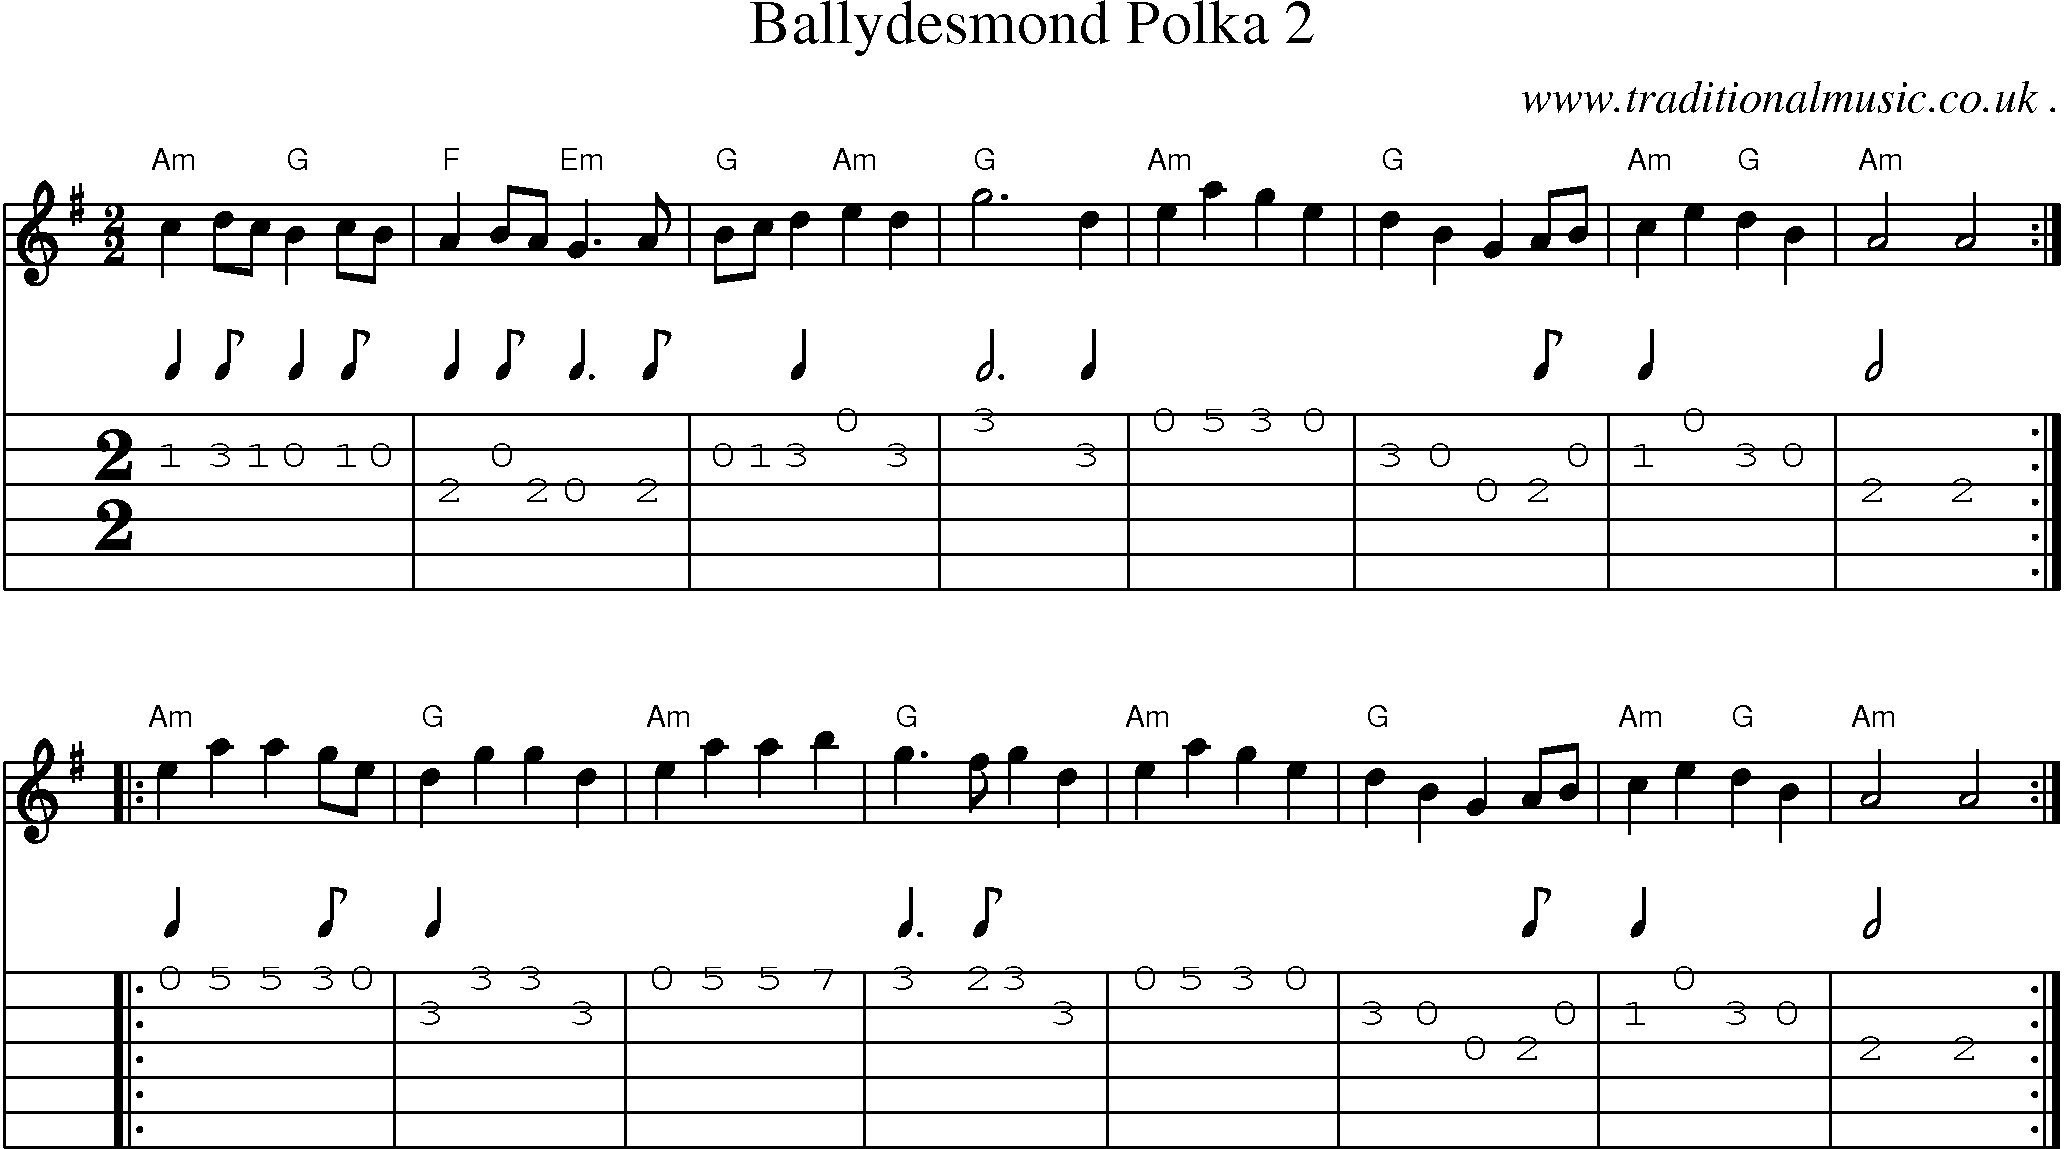 Music Score and Guitar Tabs for Ballydesmond Polka 2